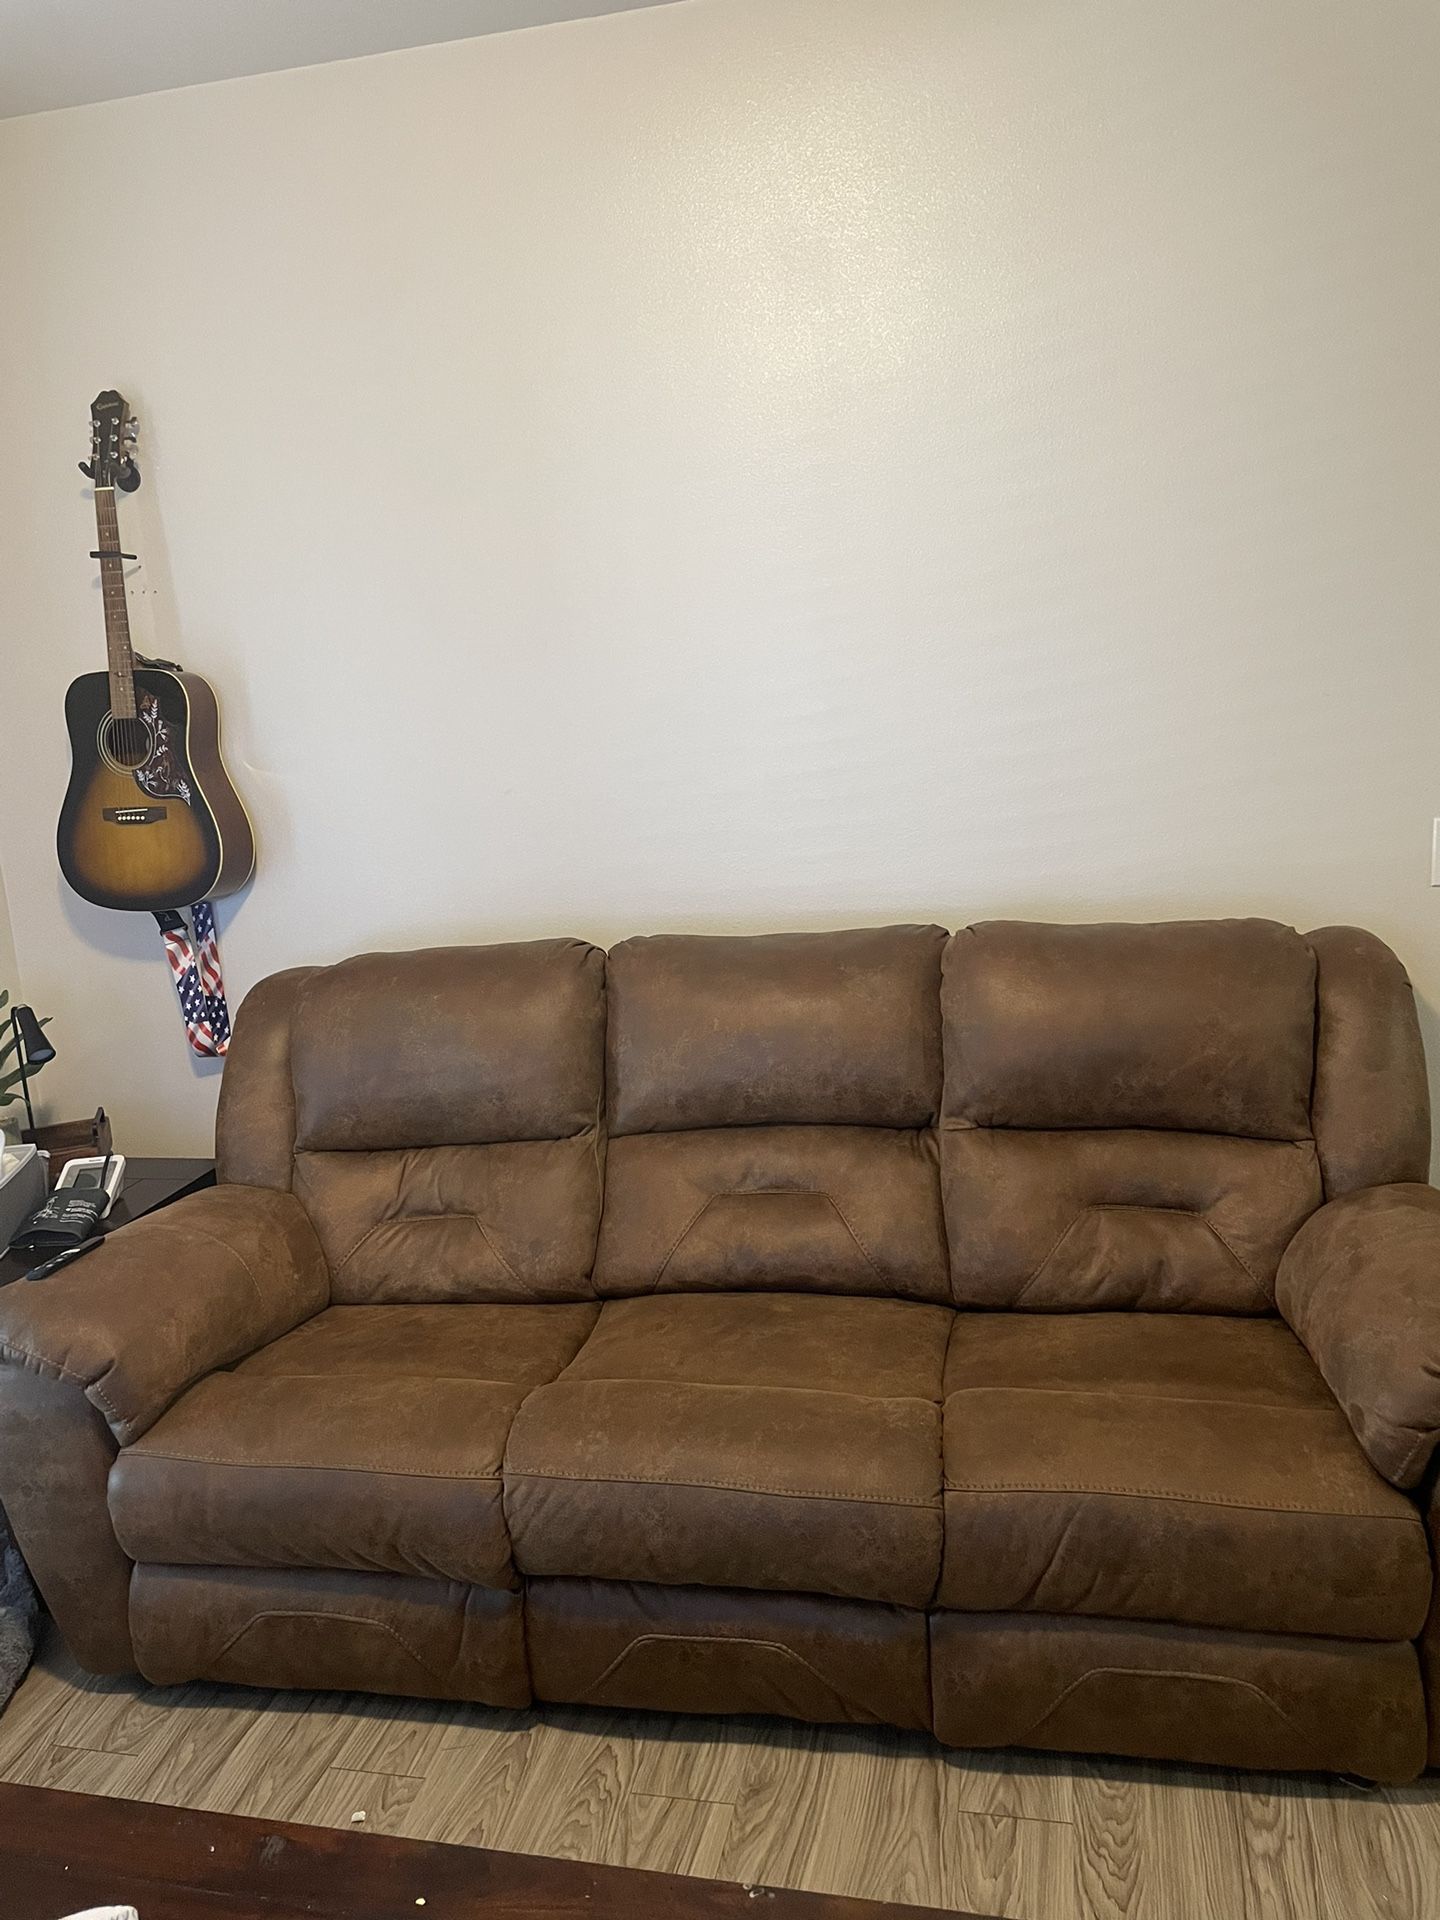 recliner couch 